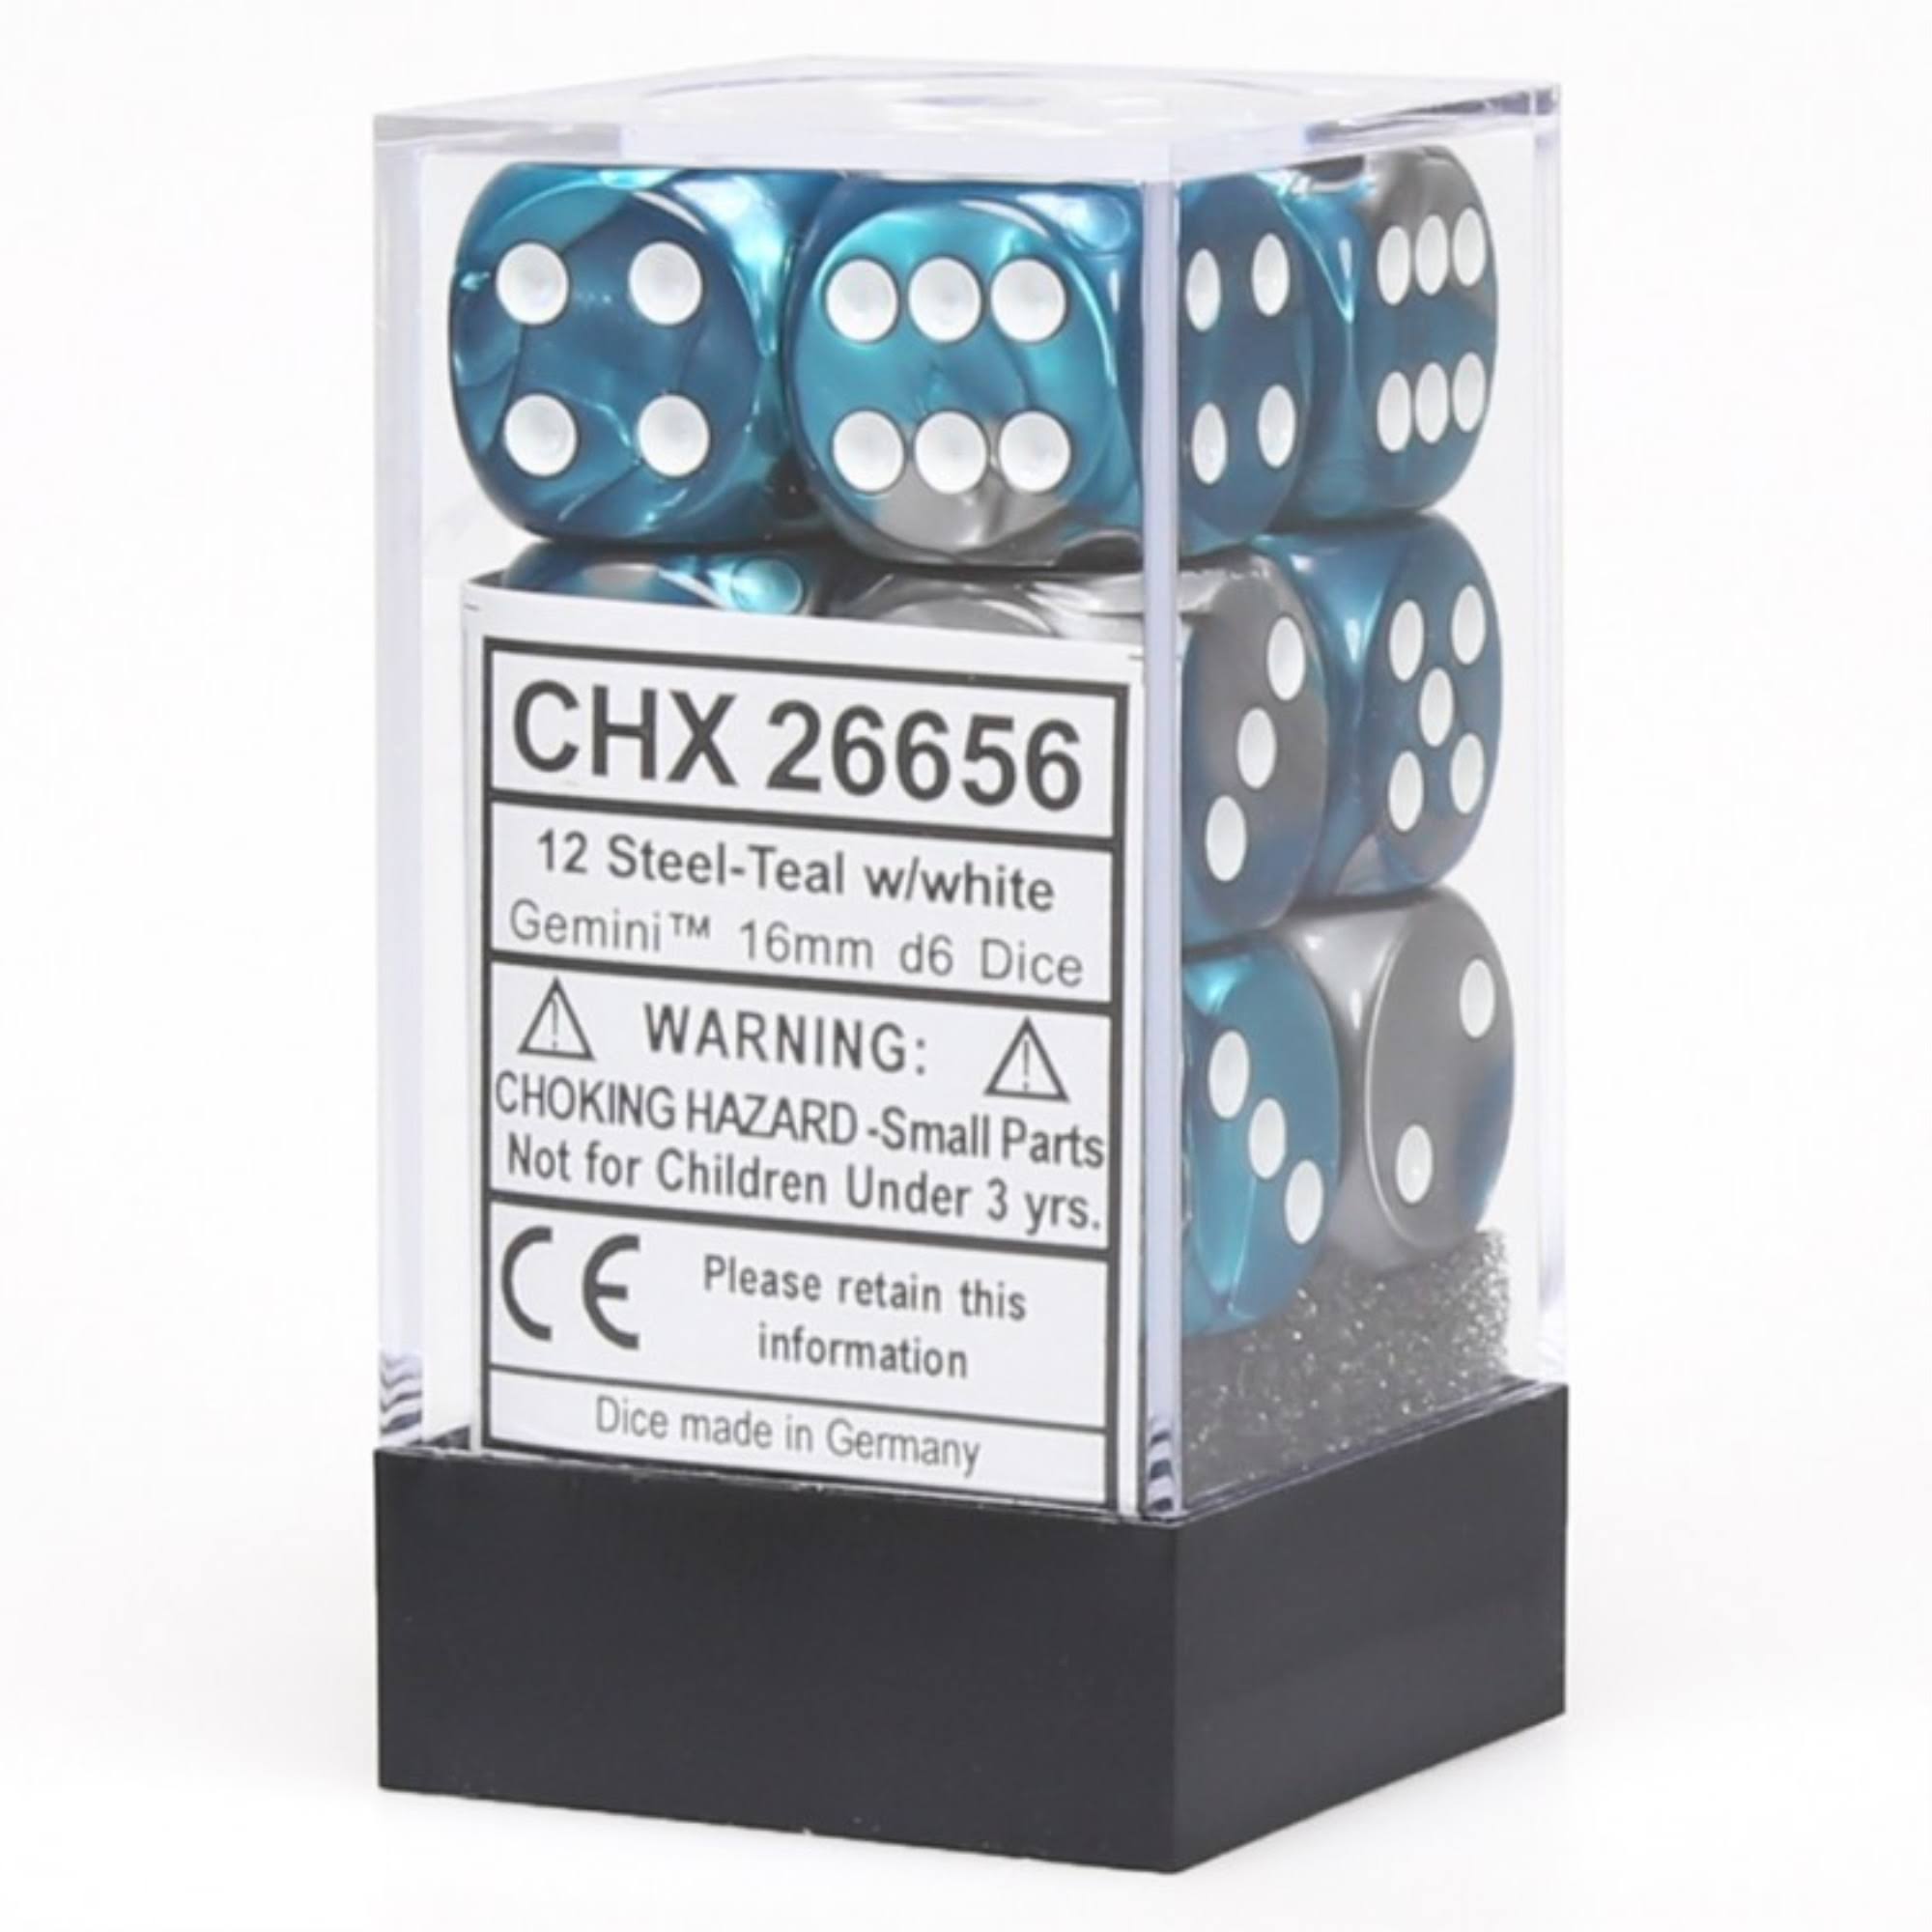 Chessex Gemini D6 Dice - Steal & Teal, 16mm, 12ct